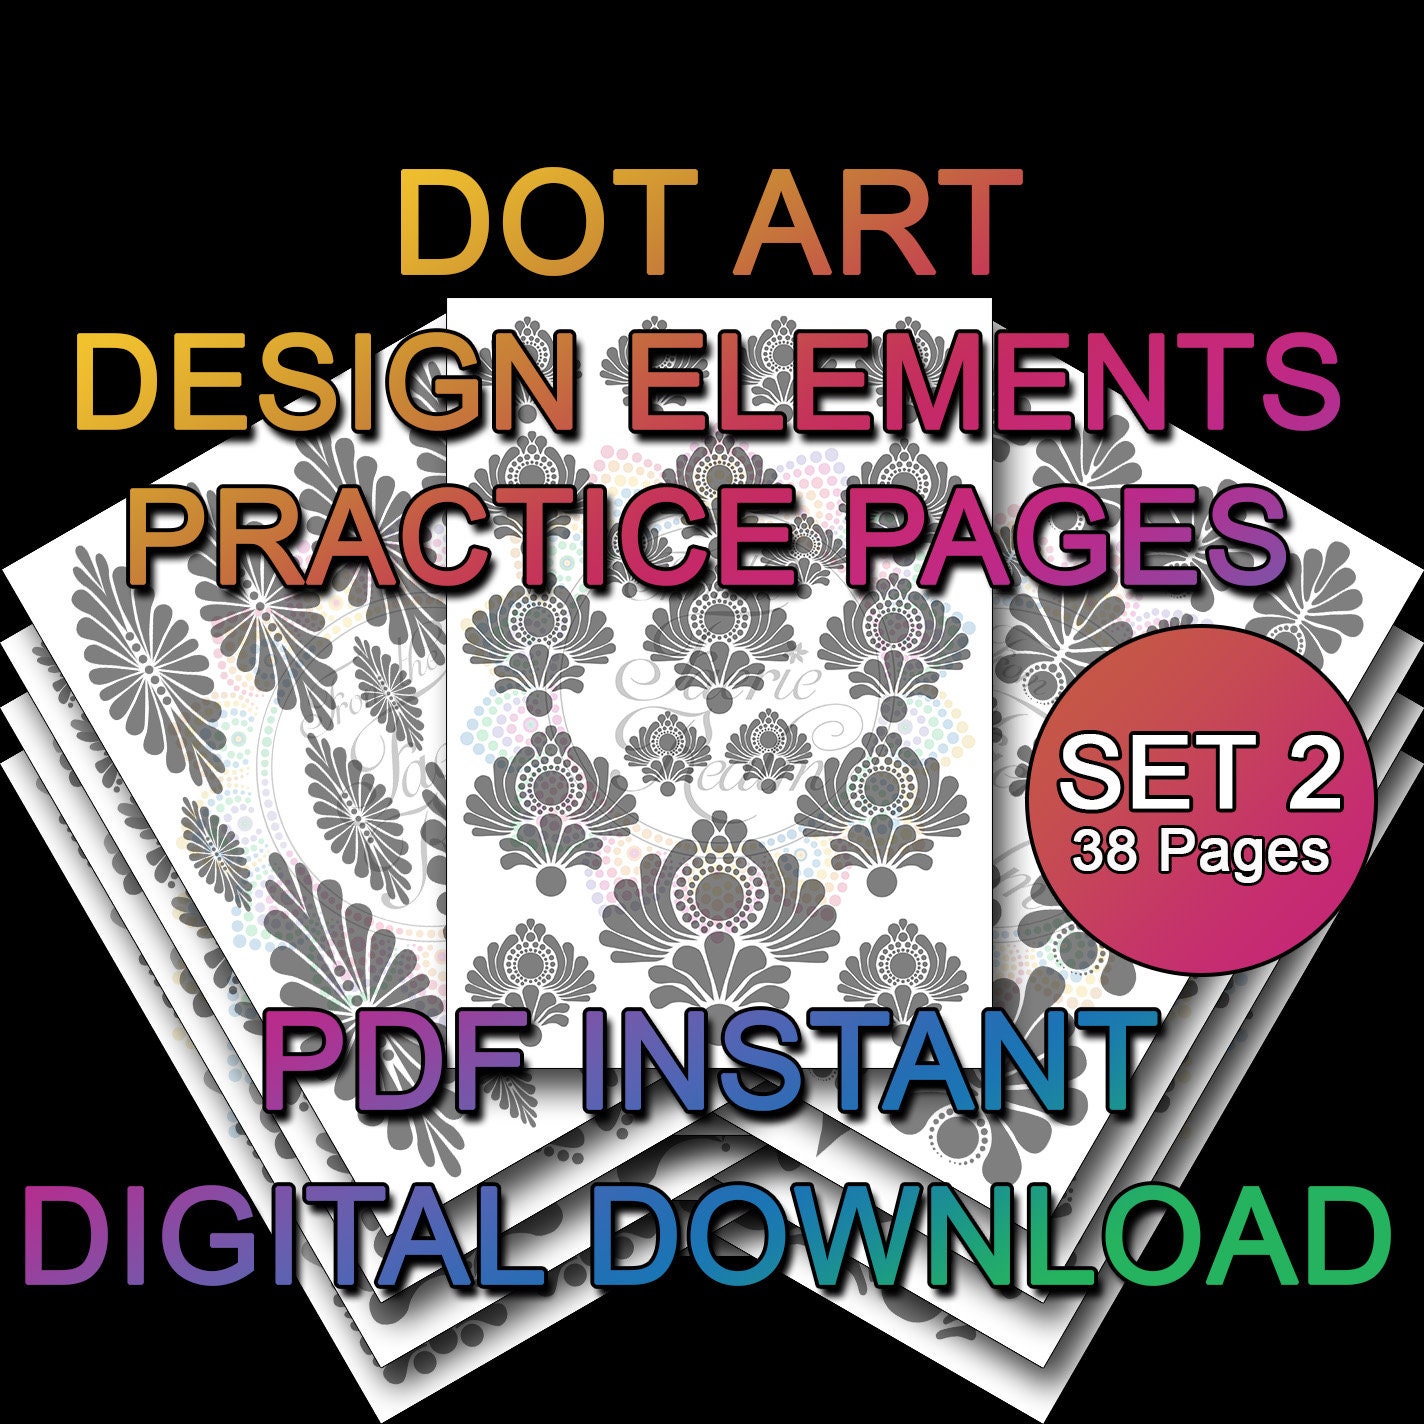 Canvas Dot Art Pattern 19 - Downloadable File - From the Faerie Realm